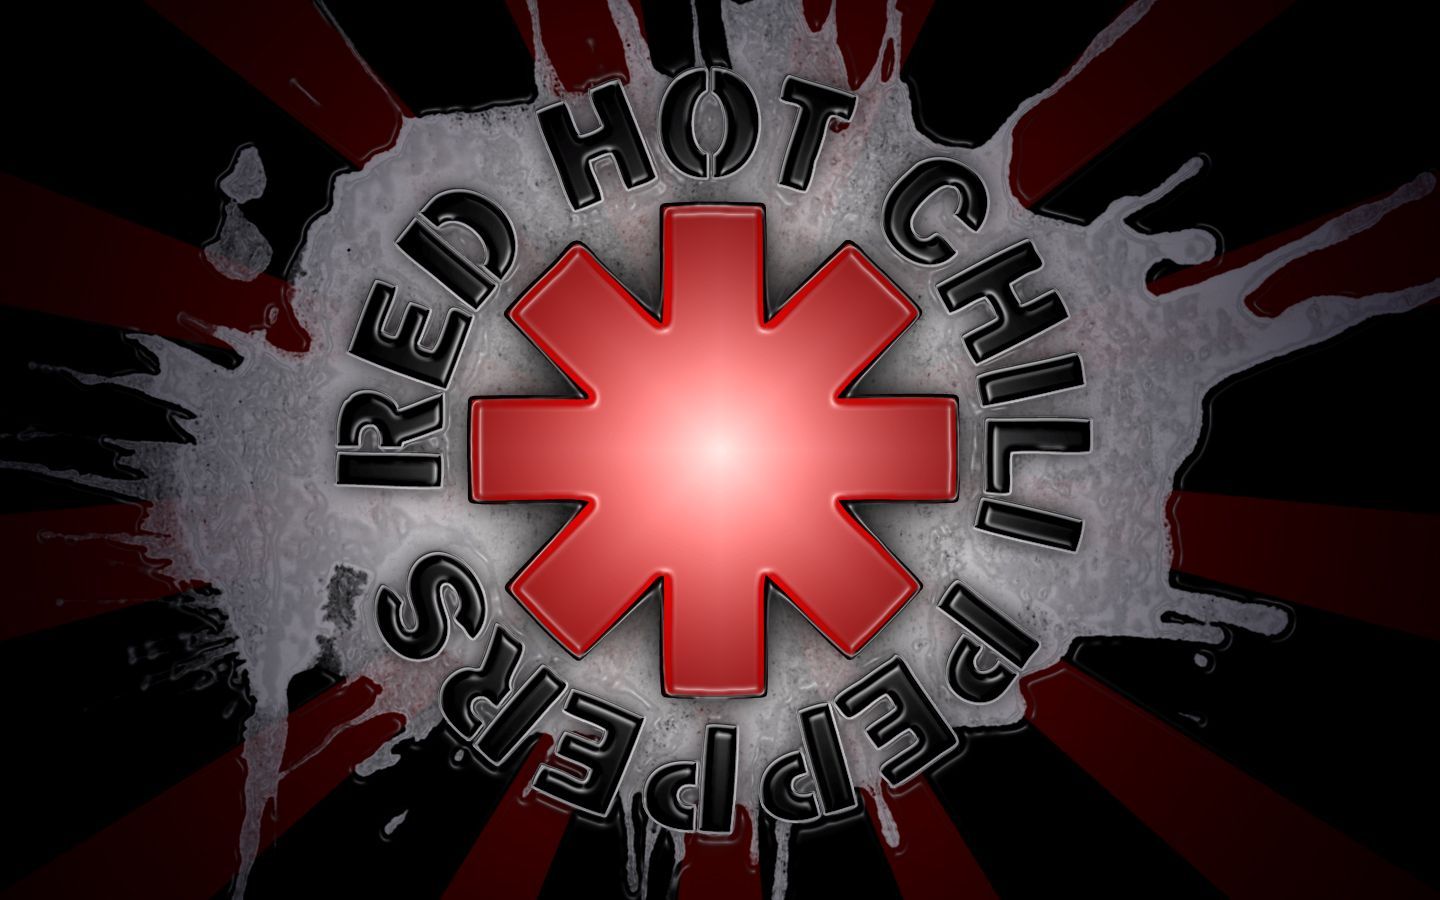 RED HOT CHILI PEPPERS by BADH13 on DeviantArt